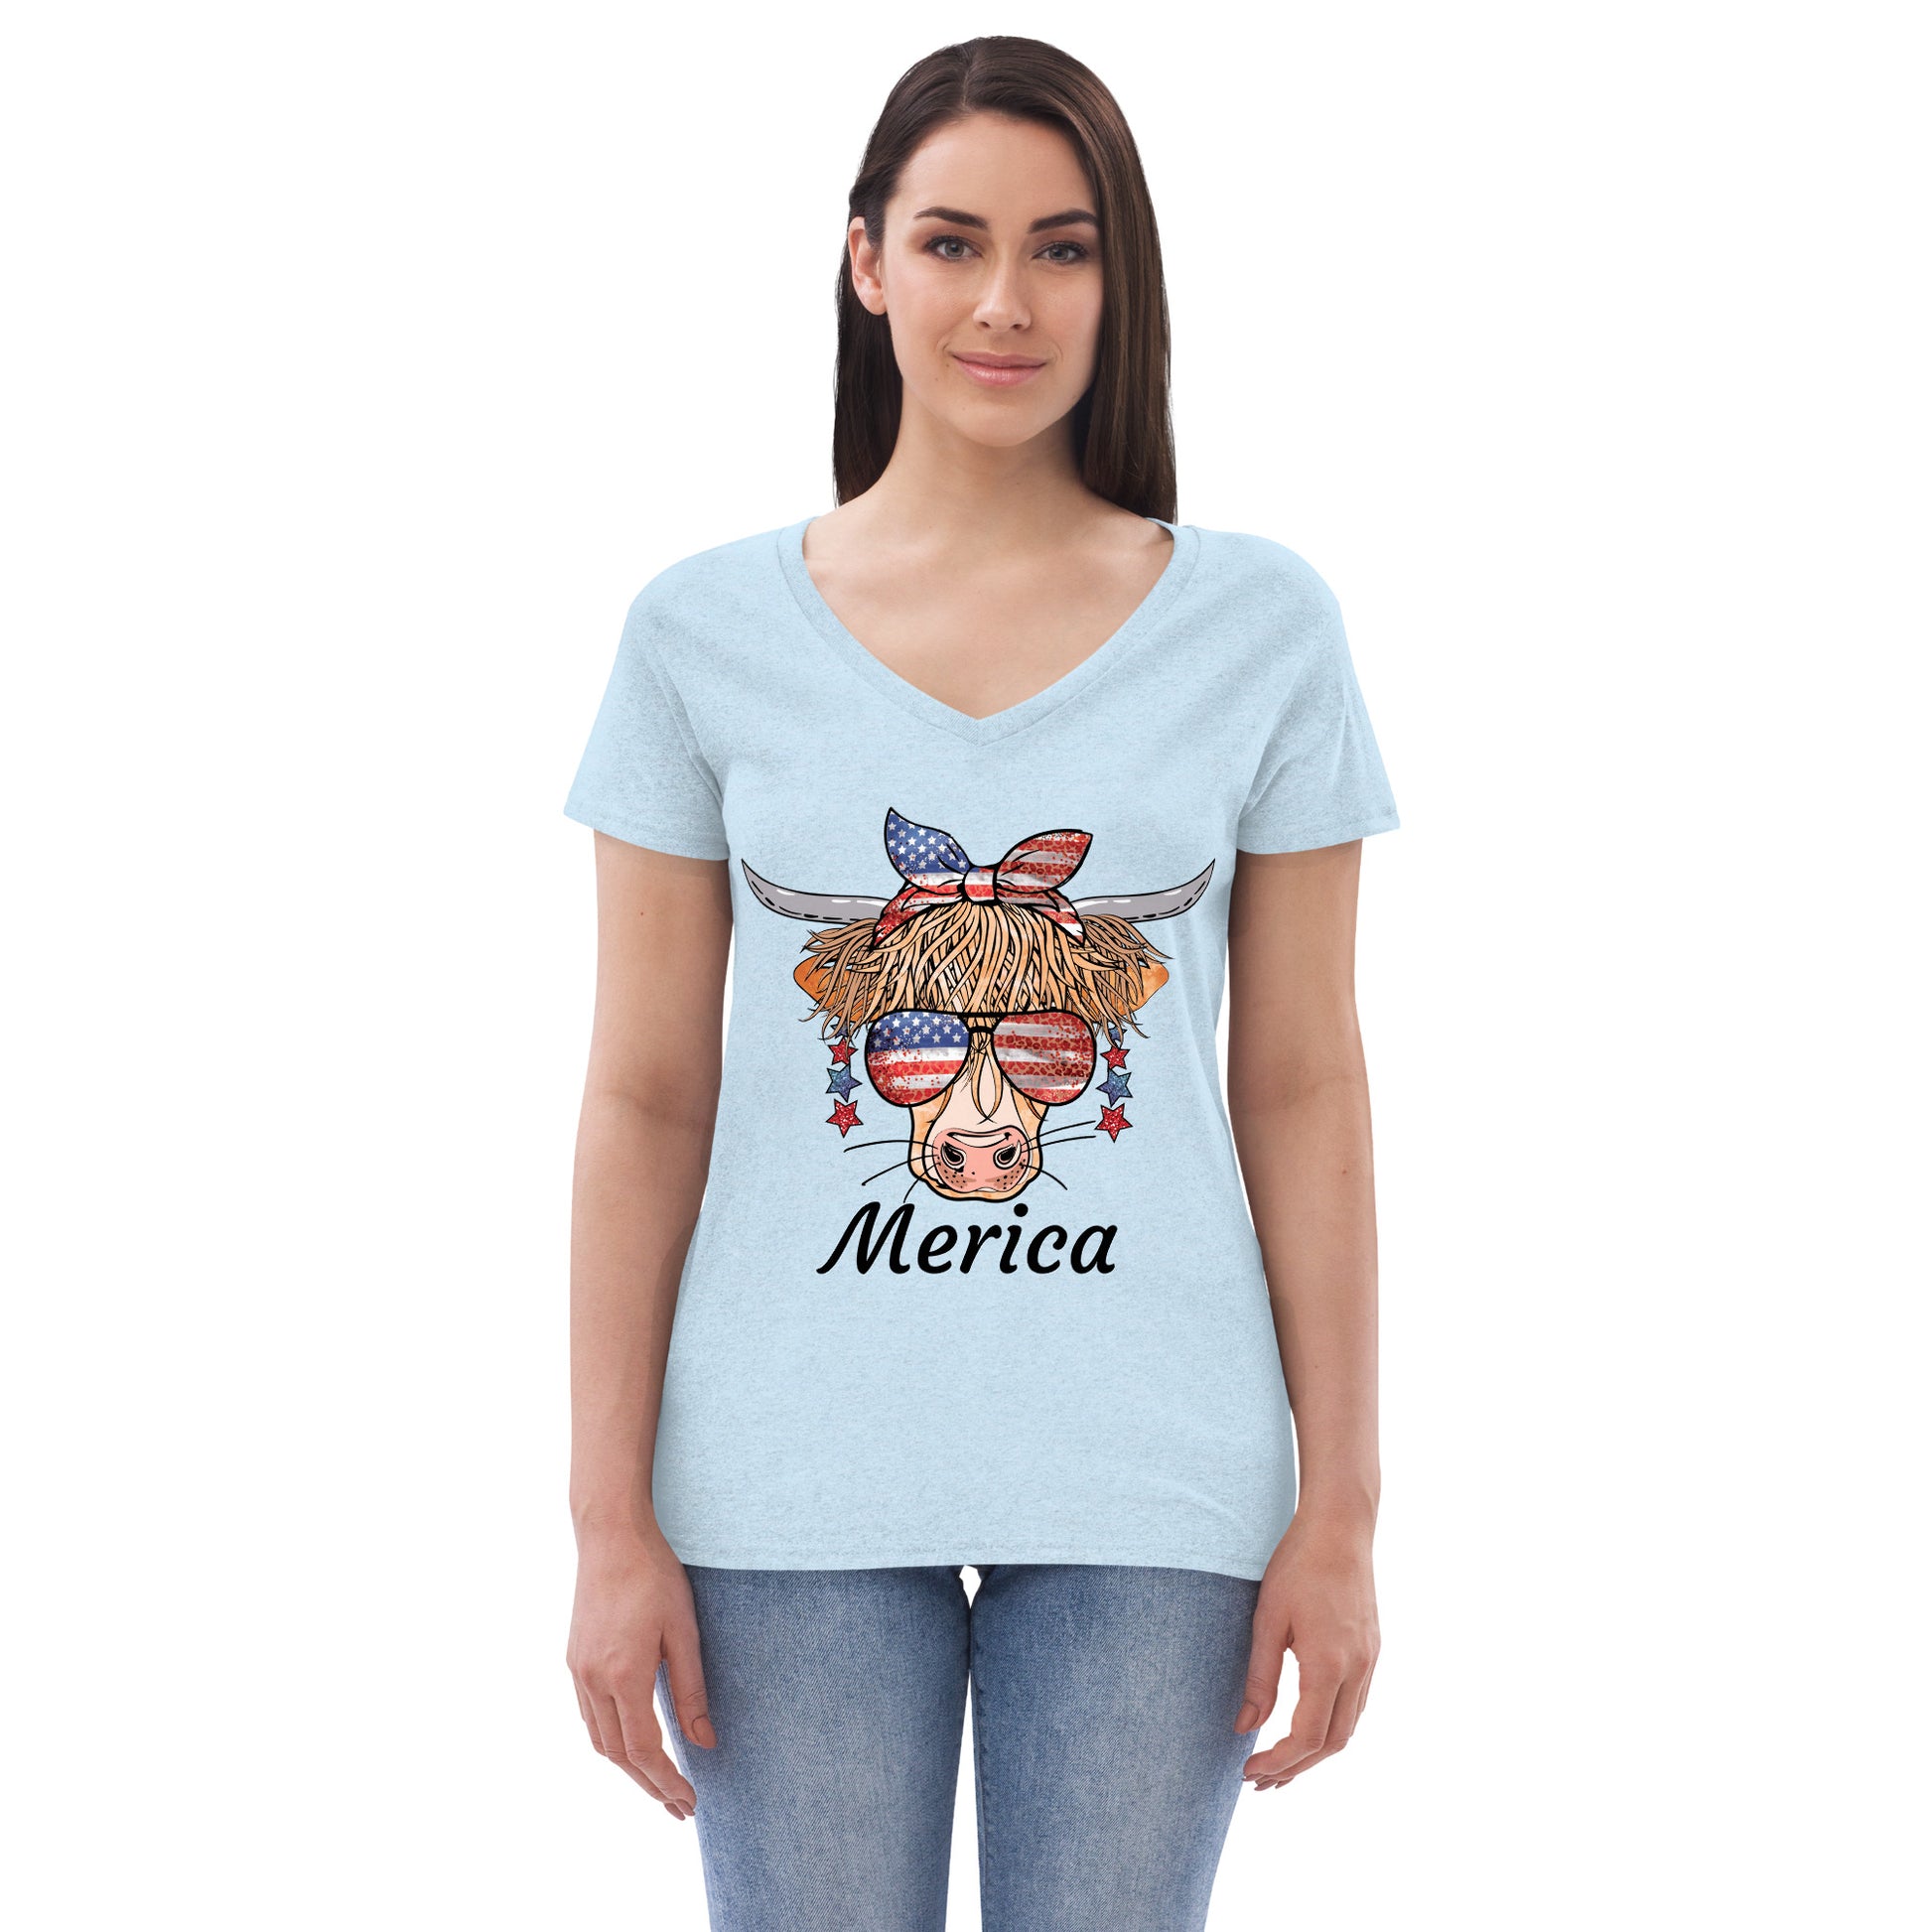 Merica Cow recycled v-neck t-shirt - Sport Finesse